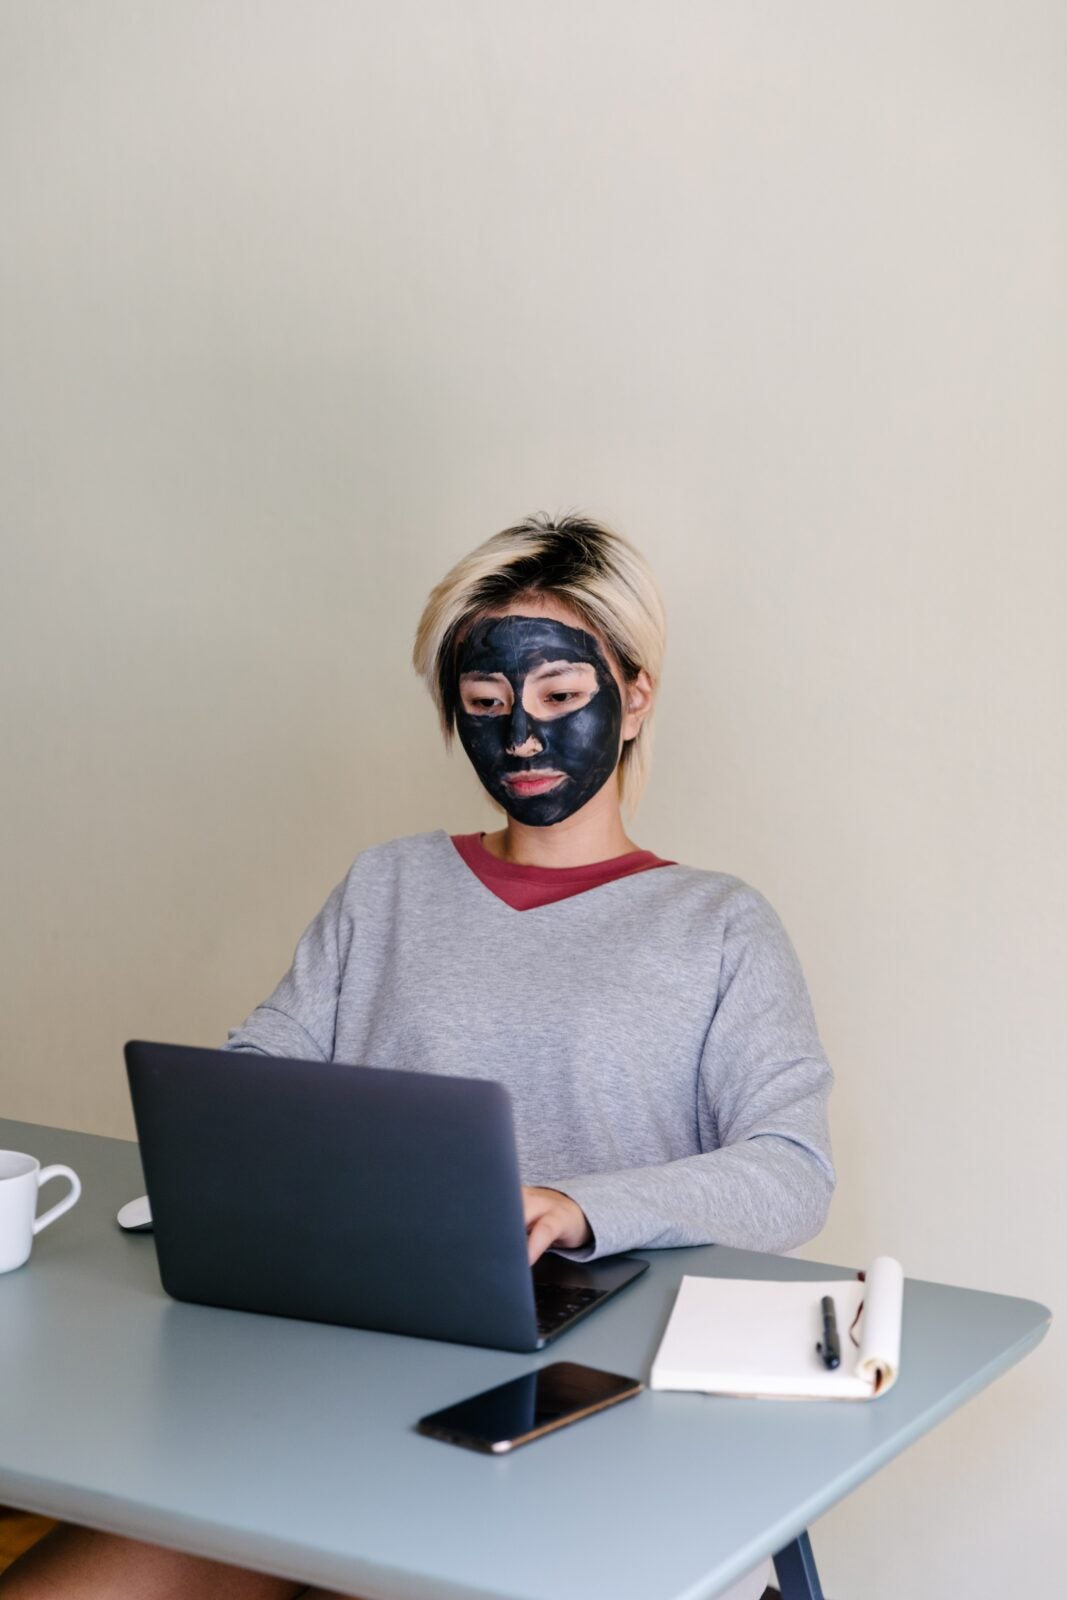 Asian woman wearing a black facial mask while using her laptop.